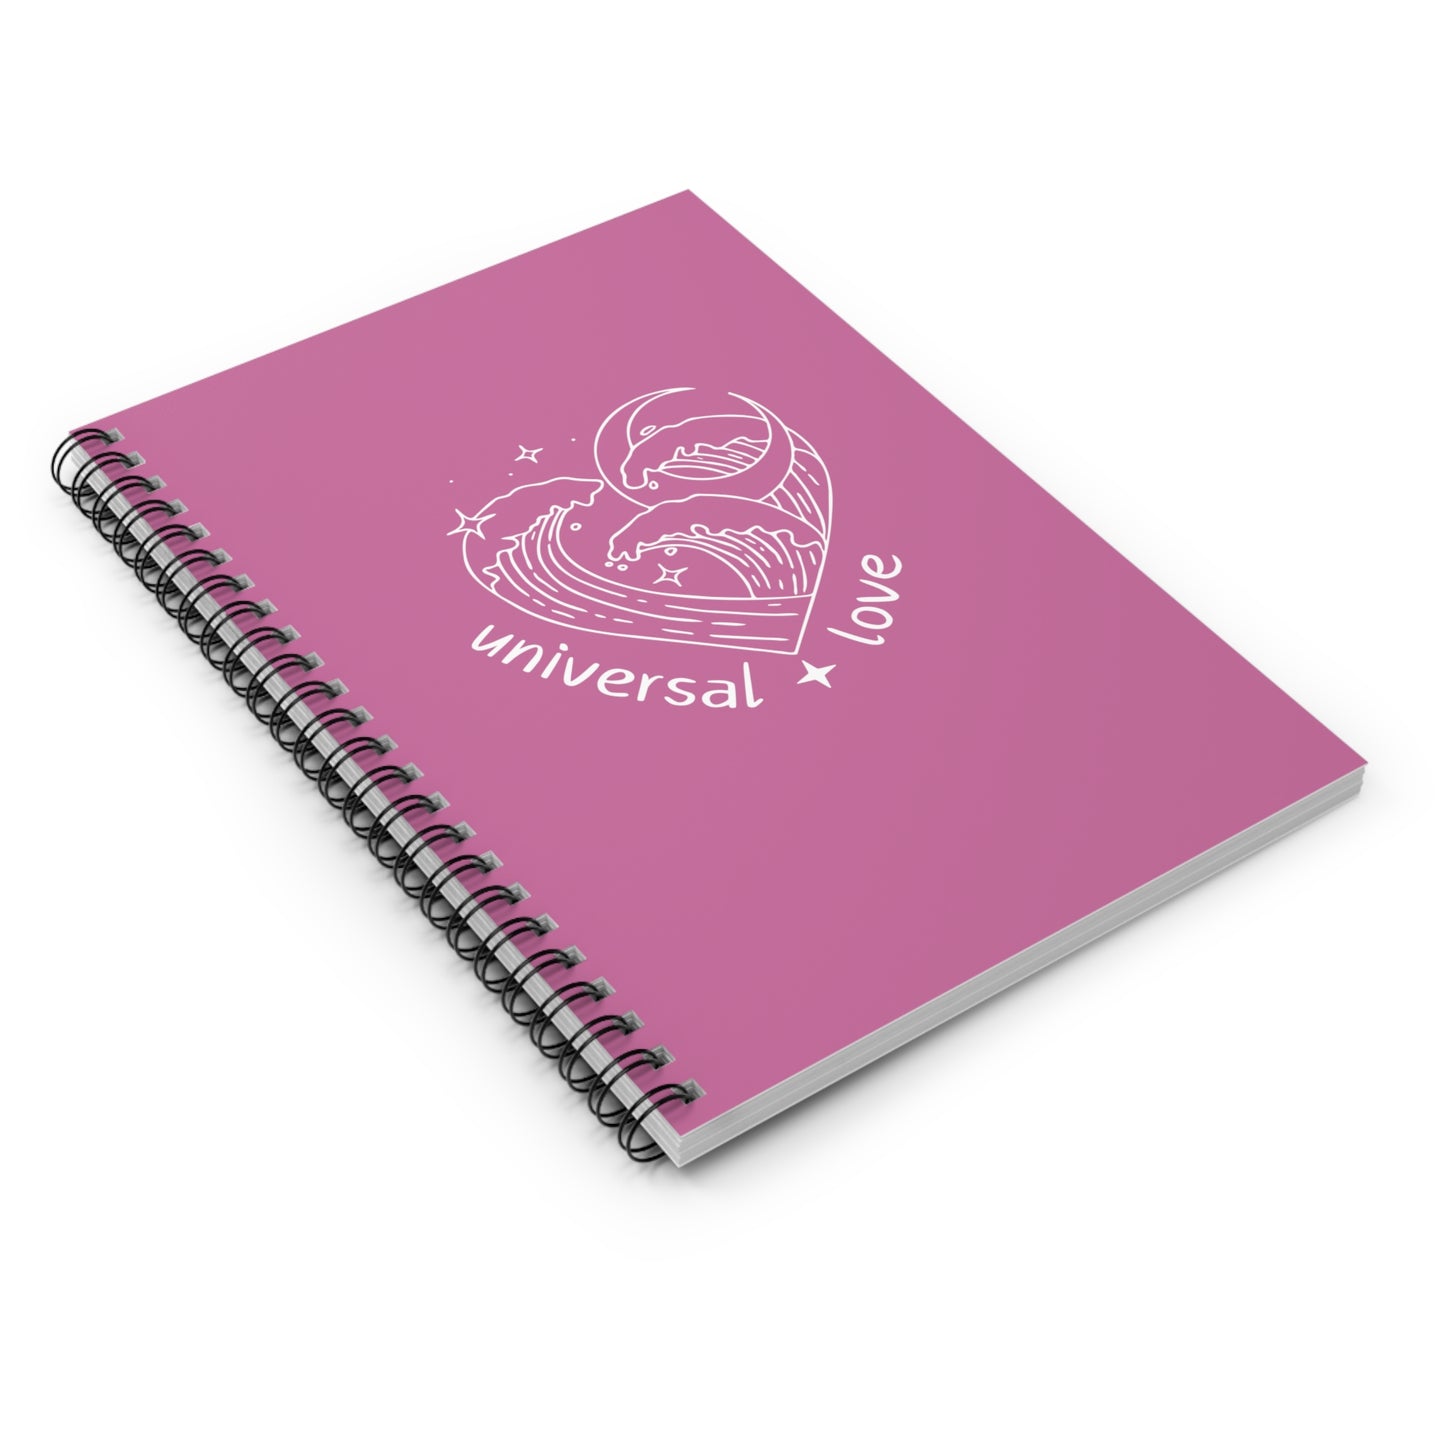 Universal Love Pink Spiral Notebook - Ruled Line